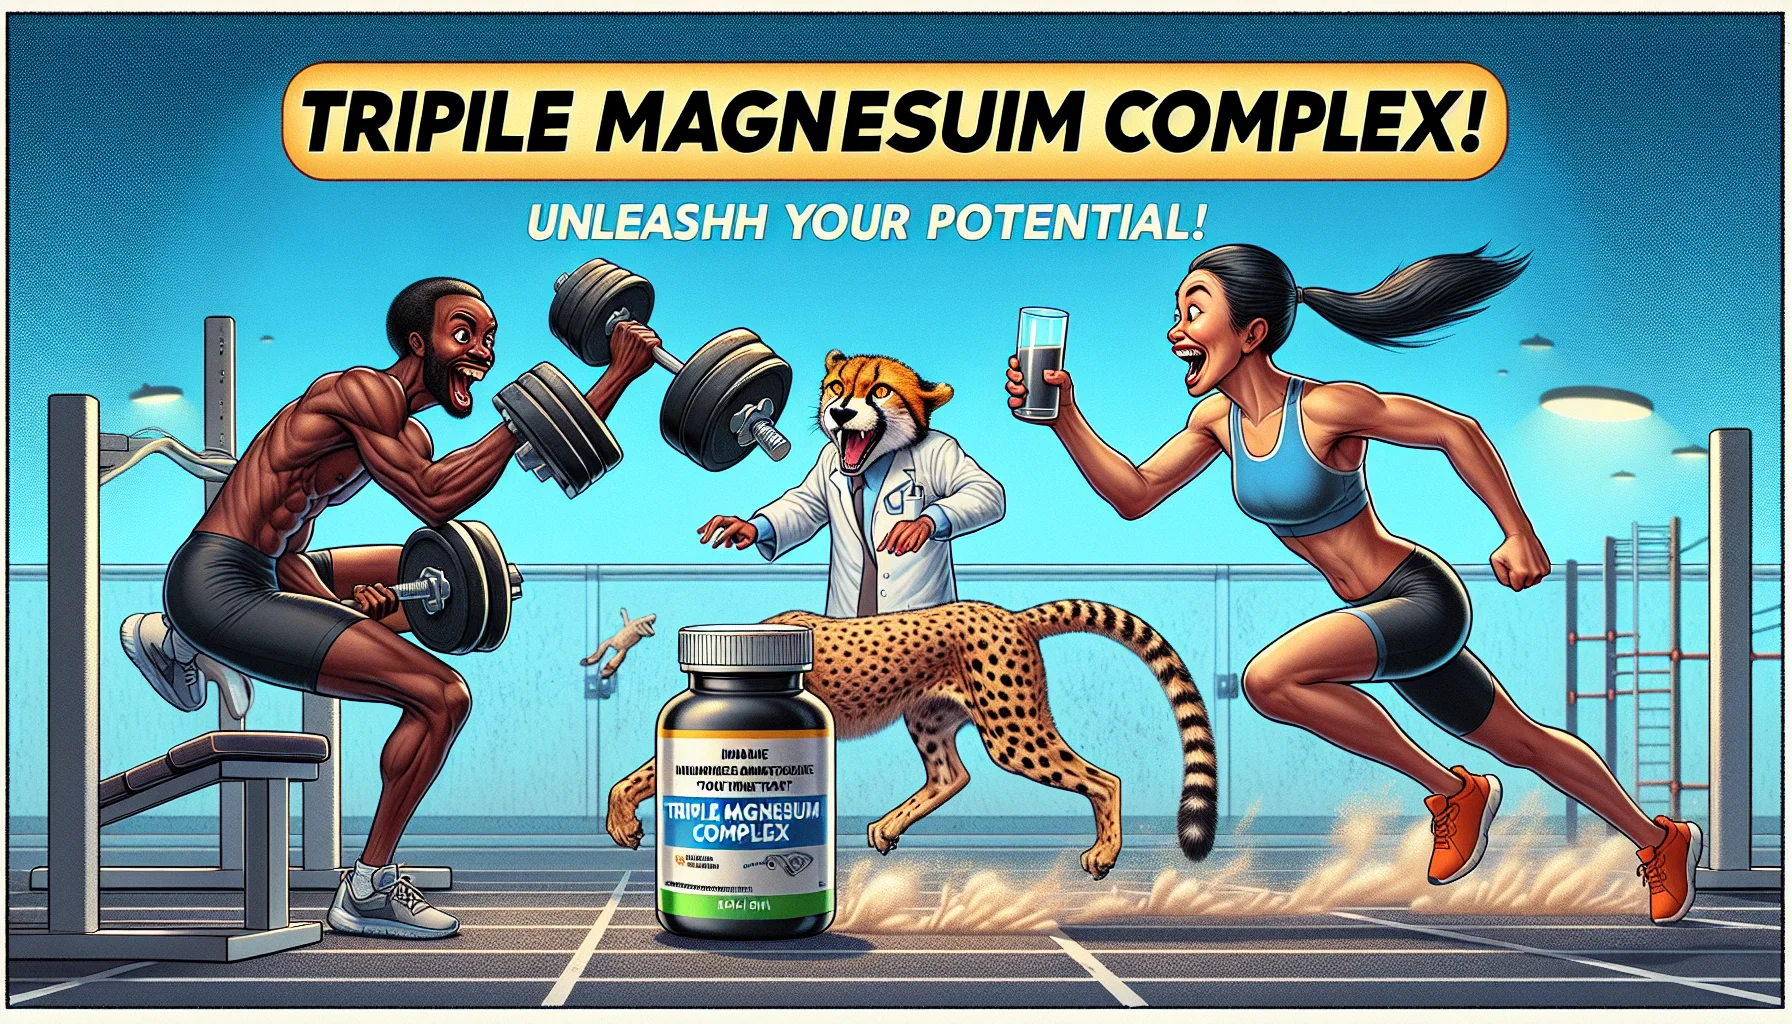 Imagine a comical scenario with a Black male athlete and a South Asian female athlete, both performing intense sports activities. On one side, the male athlete attempts to lift a heavy dumbbell and on the other side, the female athlete is trying to outrun a cheetah. Then, they take a break and gulp down Triple Magnesium Complex supplements. Suddenly, they both get a hilarious surge of energy, the man lifts the weight with ease and the woman outpaces the cheetah. A floating tagline says, 'Triple Magnesium Complex: Unleash your potential!' Strengthen the humorous and inviting aspect of this scenario.